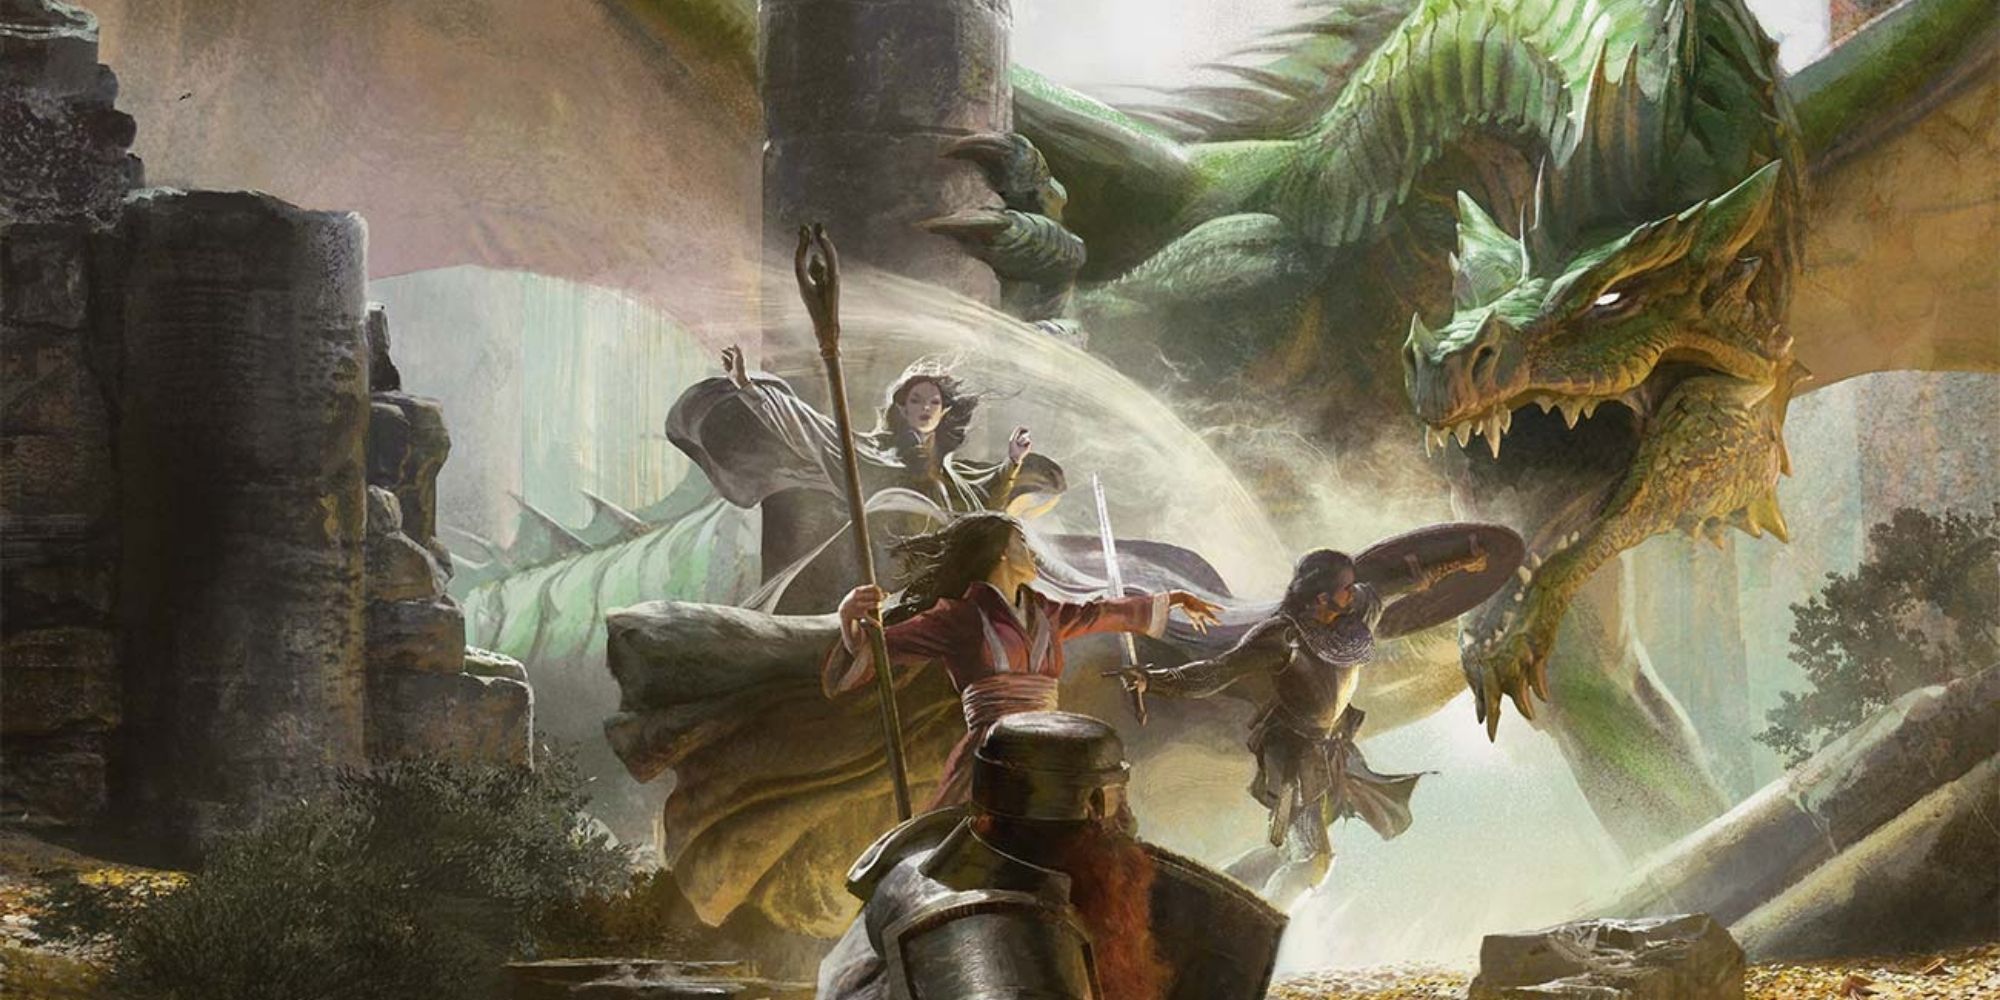 D&D Lost Mine Of Phandelver Cover Art of a party fighting a dragon in their lair